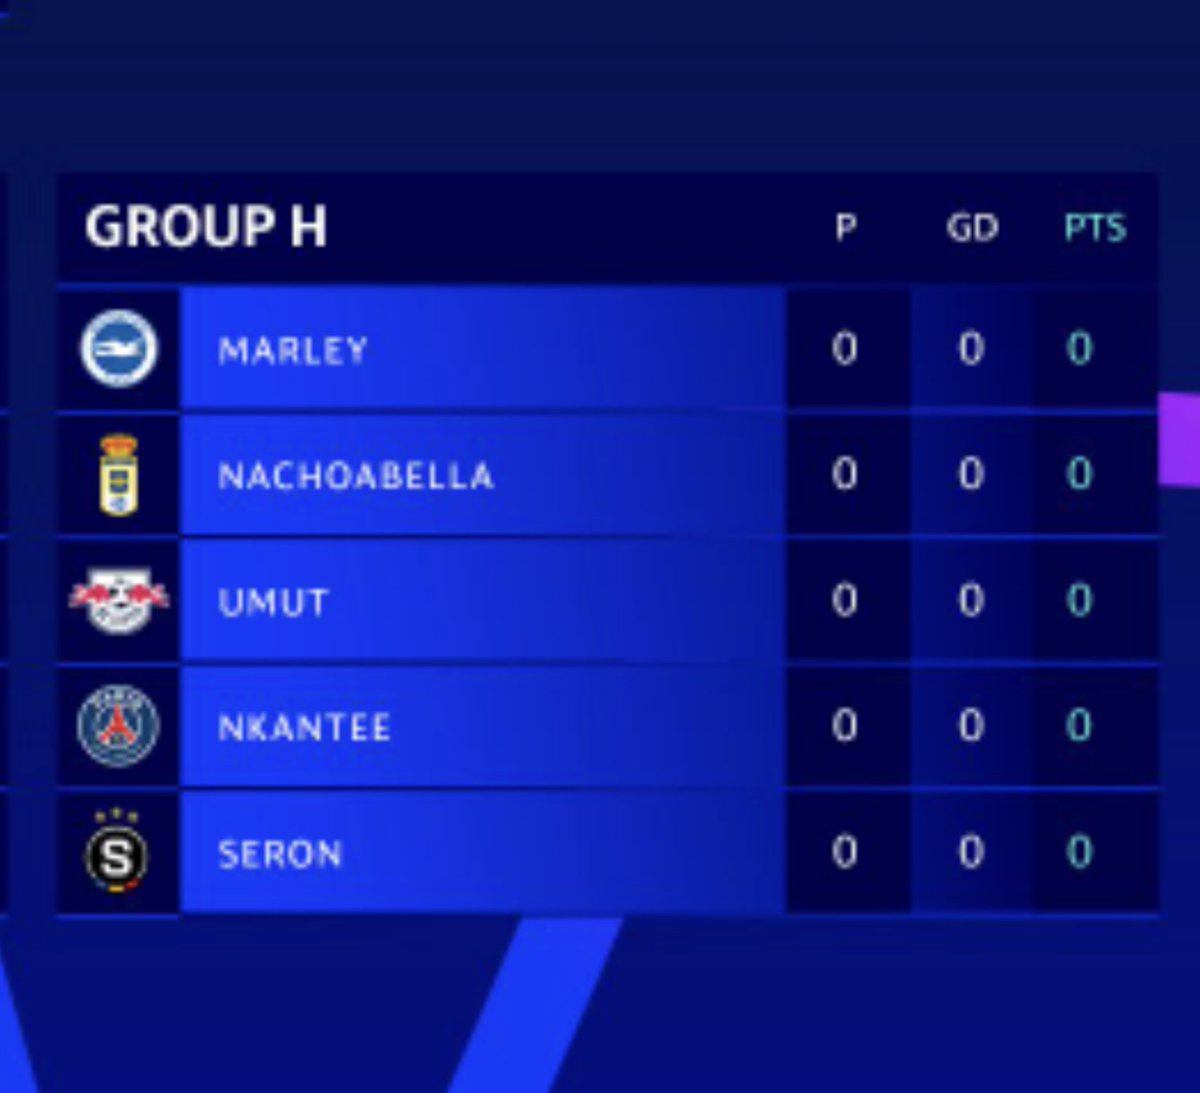 eChampions League Group H begins tomorrow! You should be able to watch my first two games on my twitch Channel from 1pm. Let's see what we can do 🙂